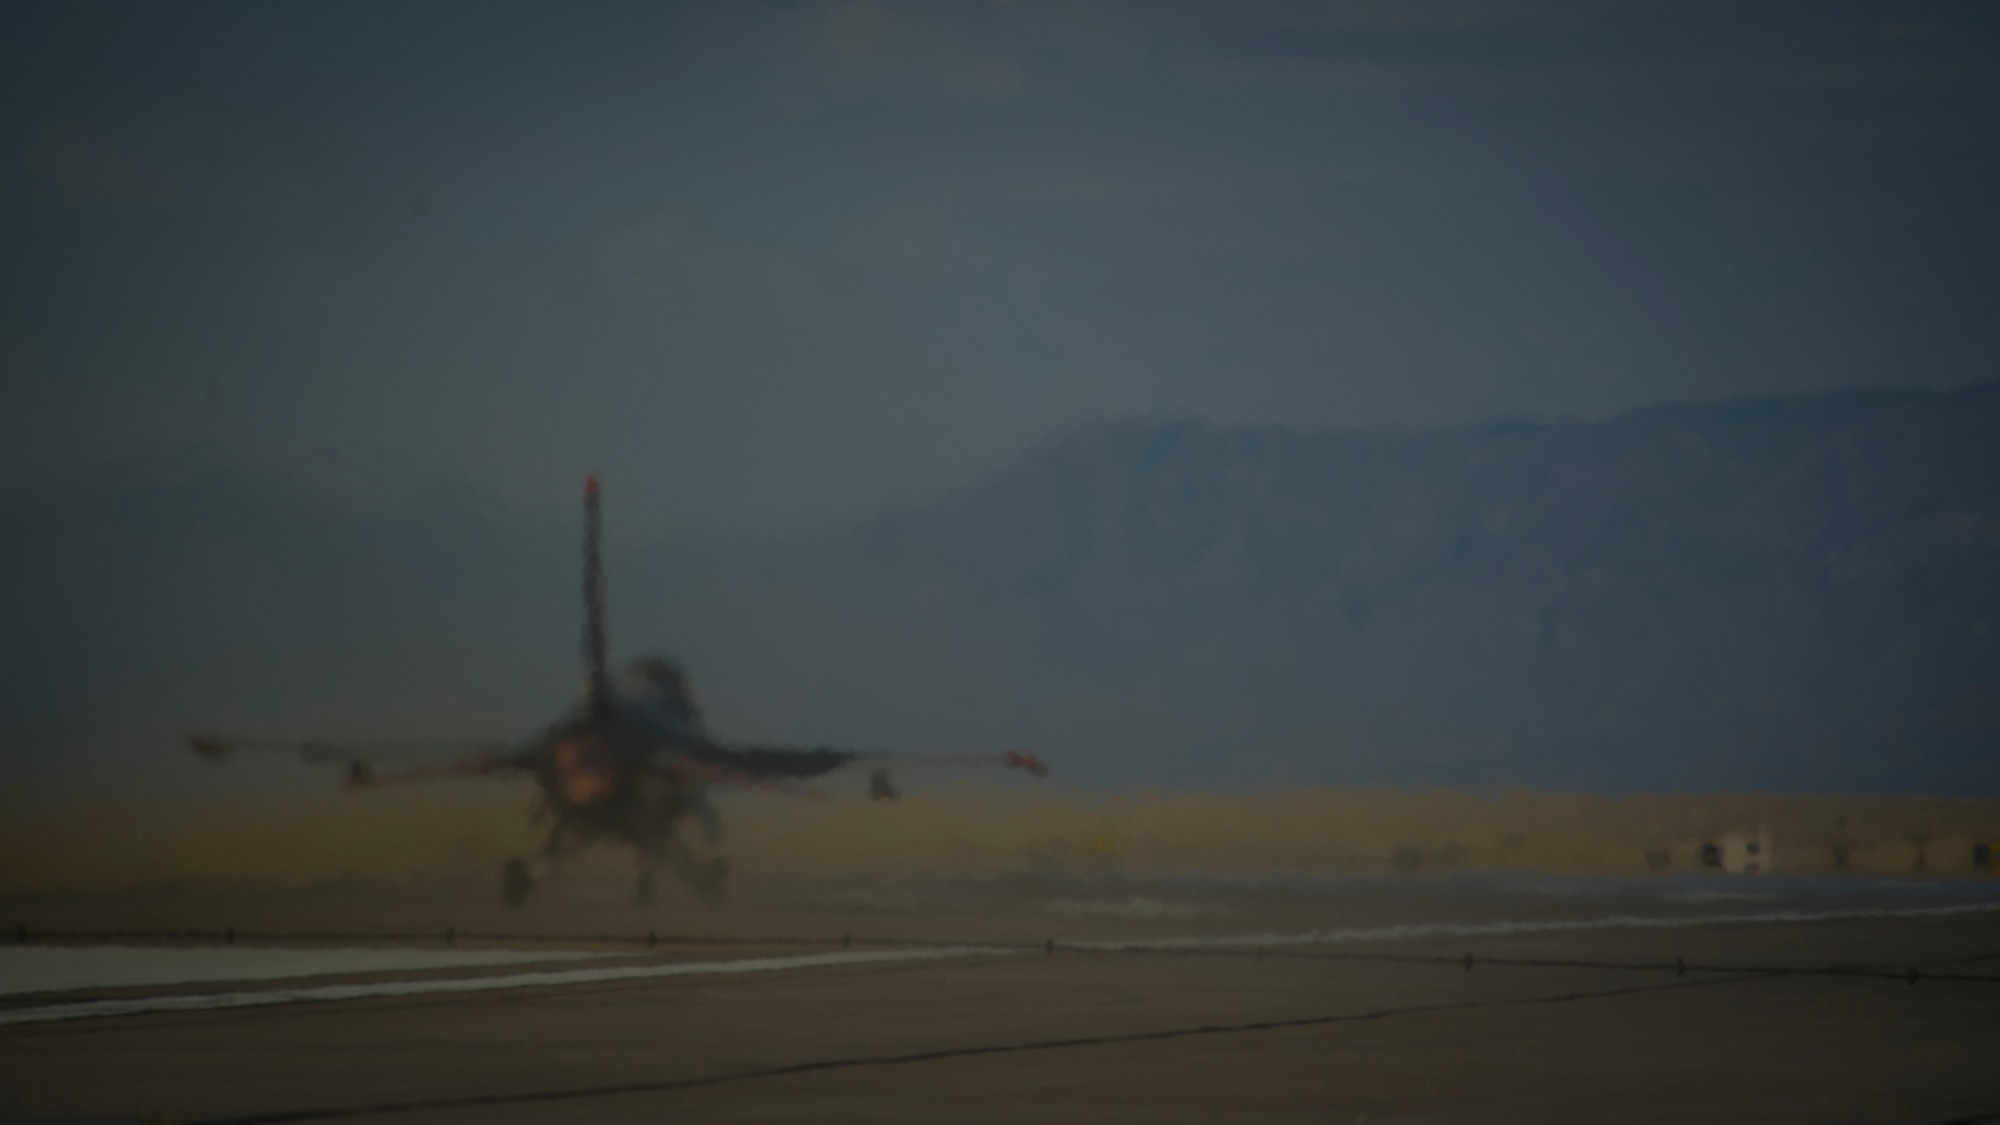 A QF-16 takes off during an unmanned live fire exercise at Holloman Air Force Base, N.M., June 25. A QF-16 took part in an operational live fire exercise as part of the aircrafts test flight program before the beginning of production at the Boeing facility in Cecil Field, Jacksonville, Fla. in late 2014. (U.S. Air Force photo by Airman 1st Class Aaron Montoya / Released)